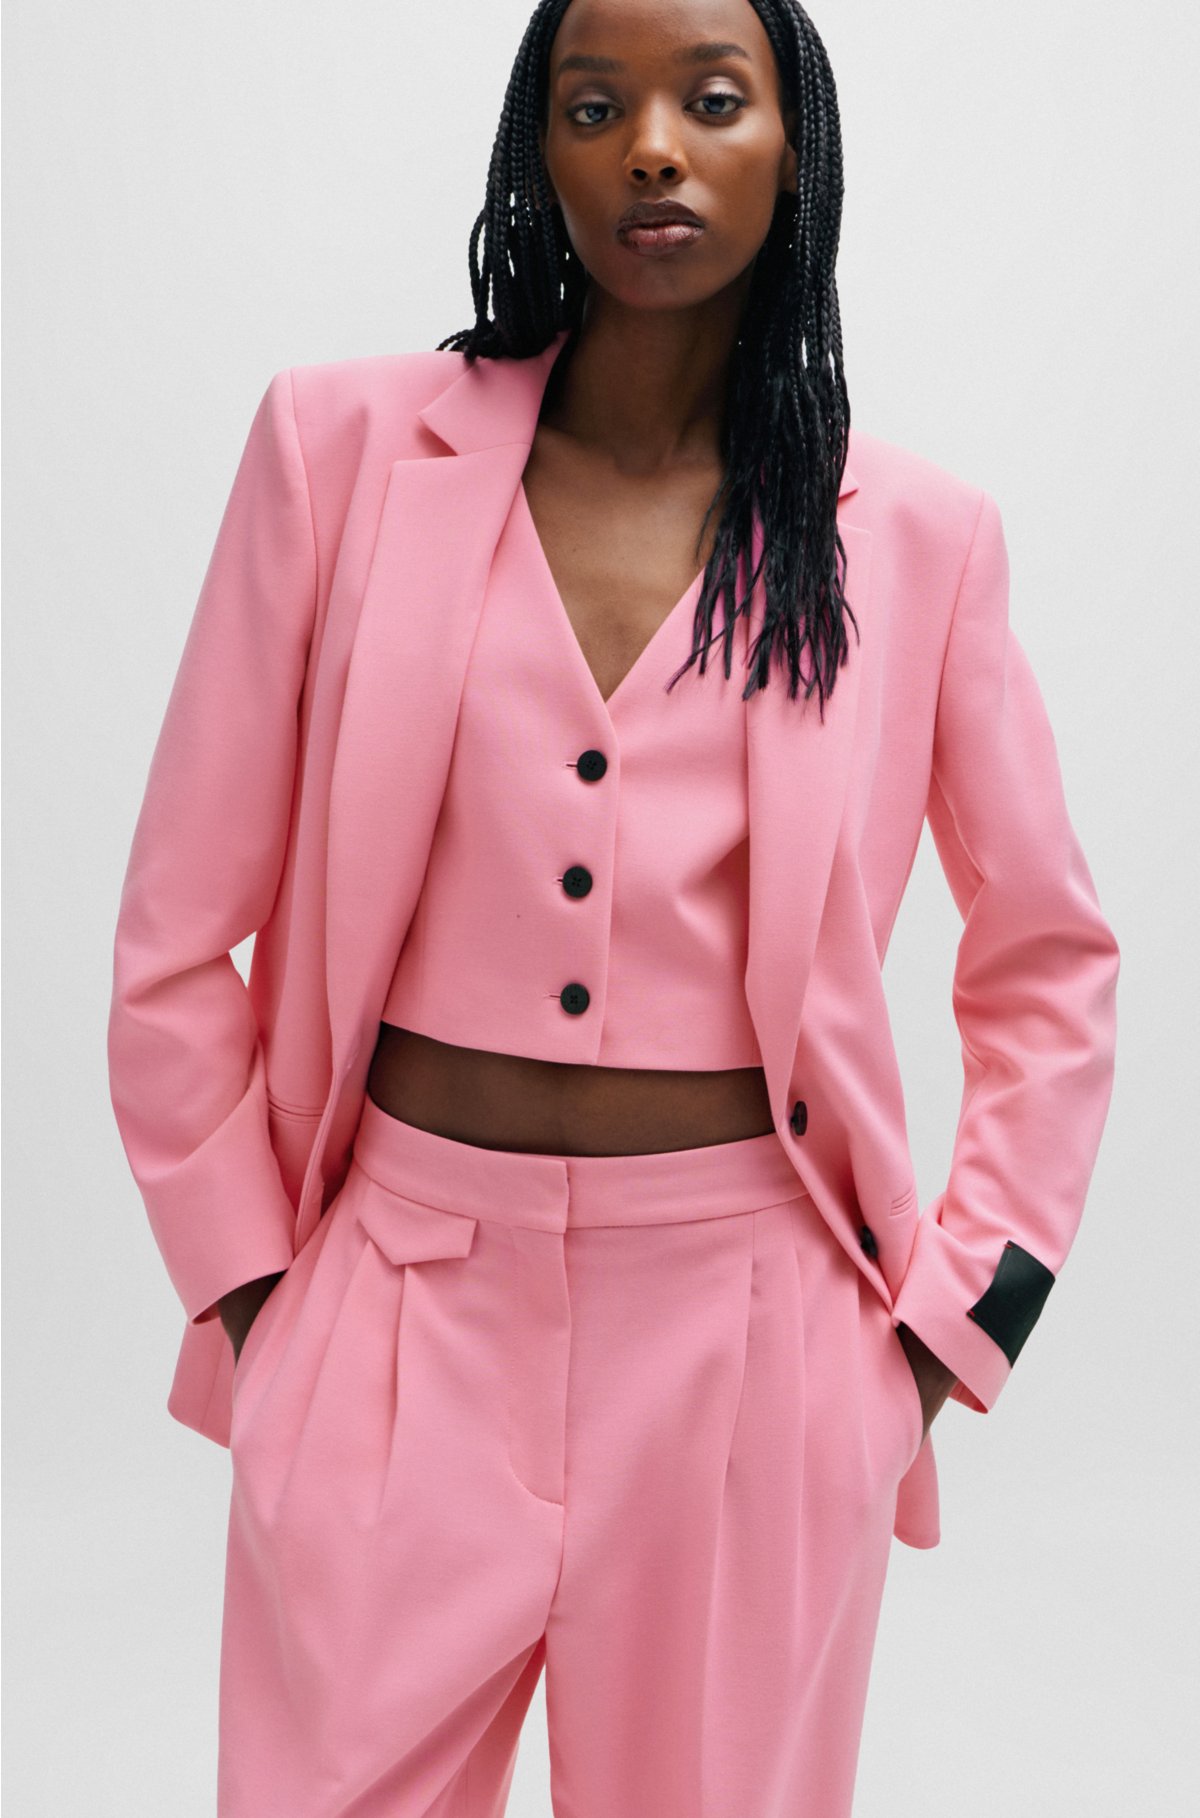 Regular-fit jacket in stretch fabric, light pink